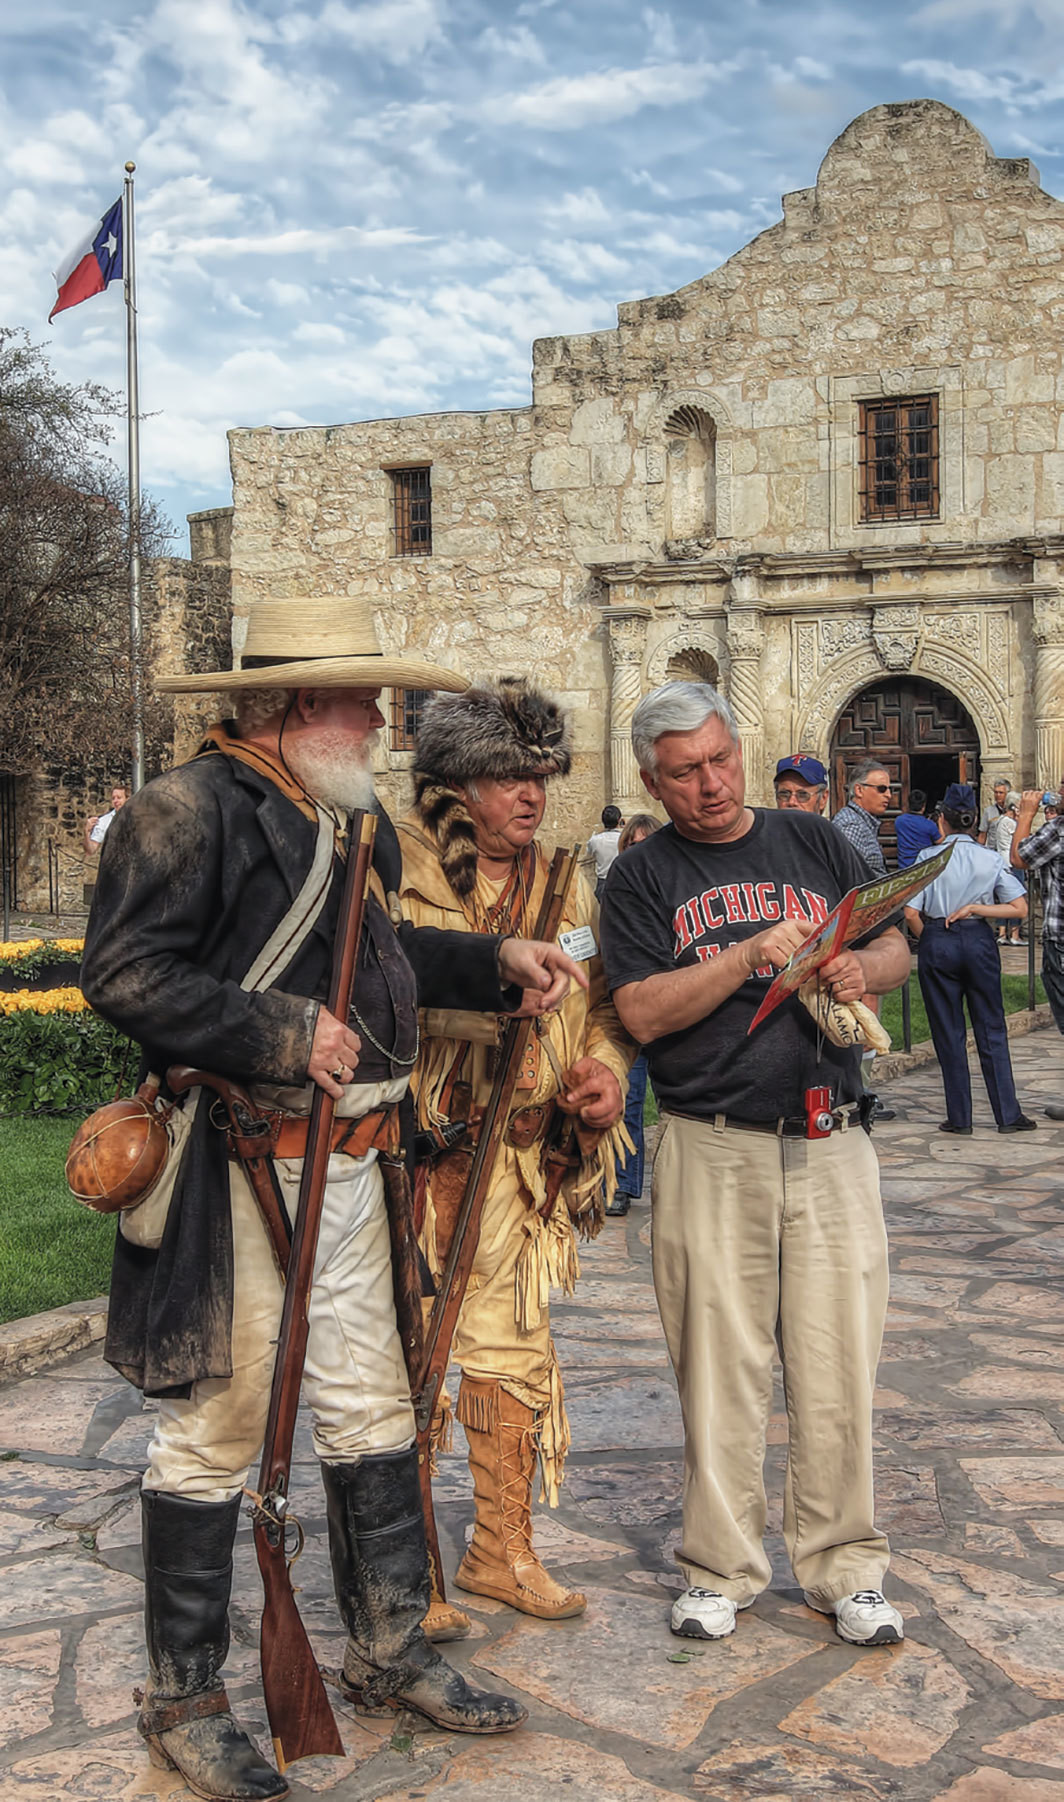 A tourist asks Davy Crockett and James Bowie impersonators for directions during the 175th anniversary of the Battle of the Alamo, San Antonio, Texas, March 4, 2011.